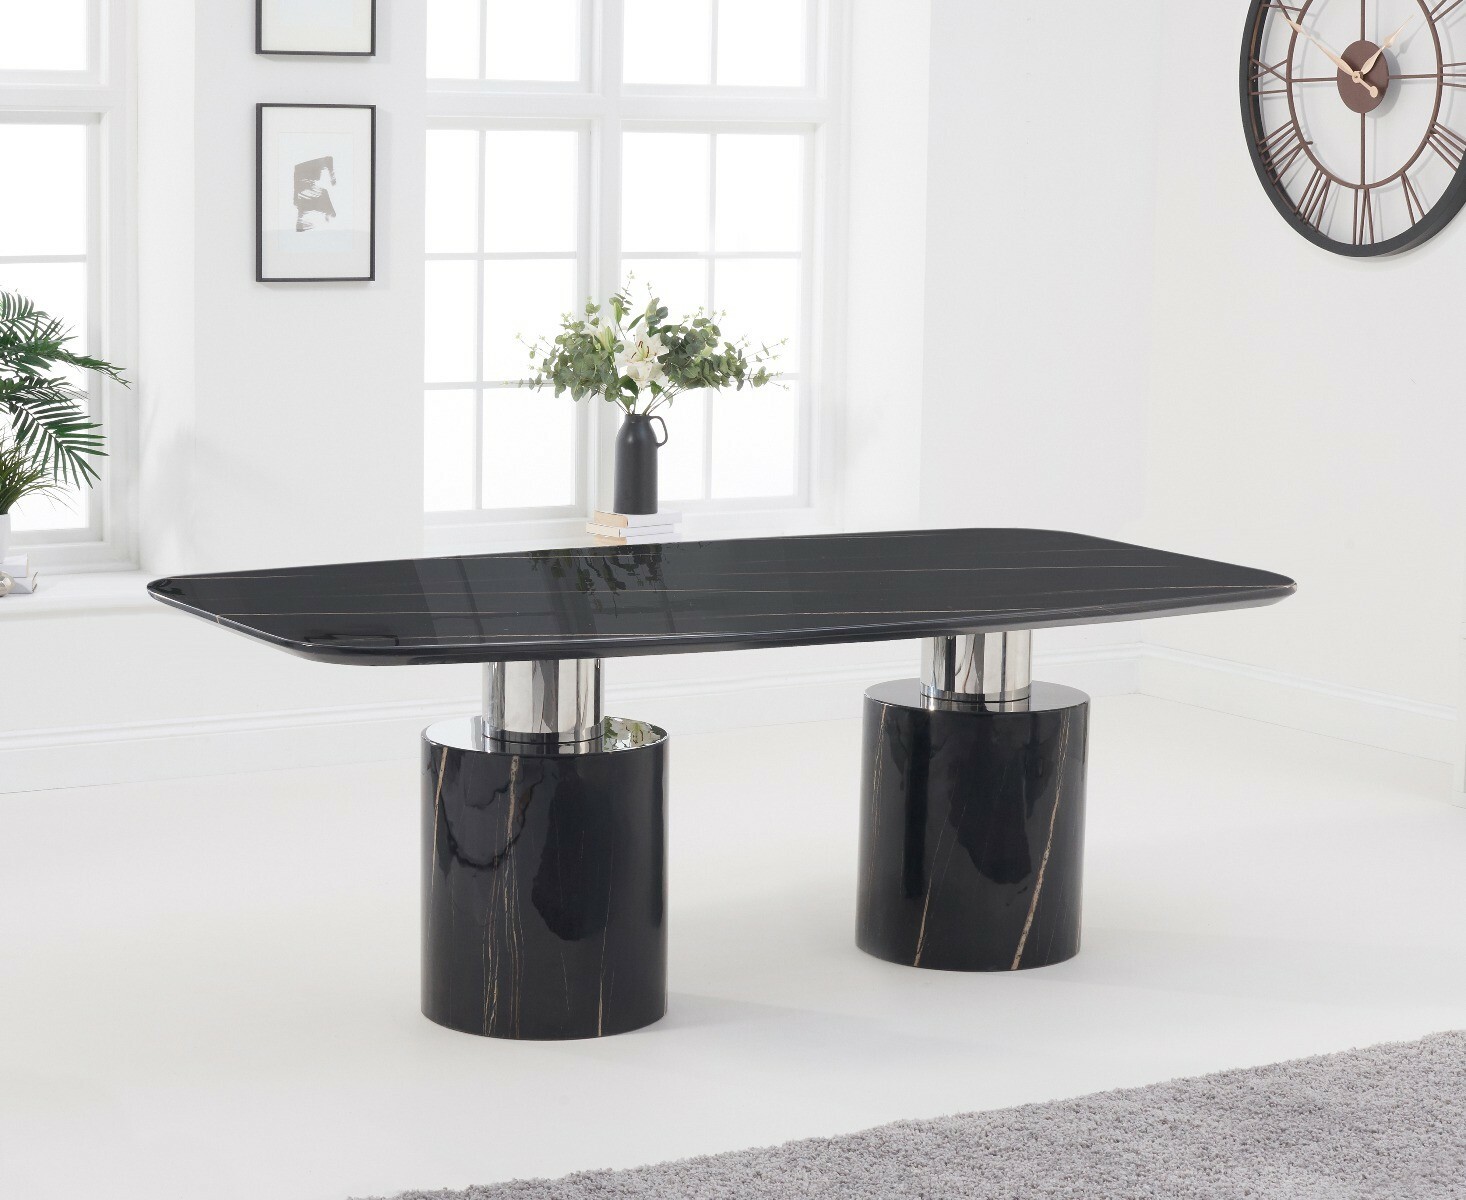 Photo 4 of Antonio 180cm black marble dining table with 6 grey francesca chairs